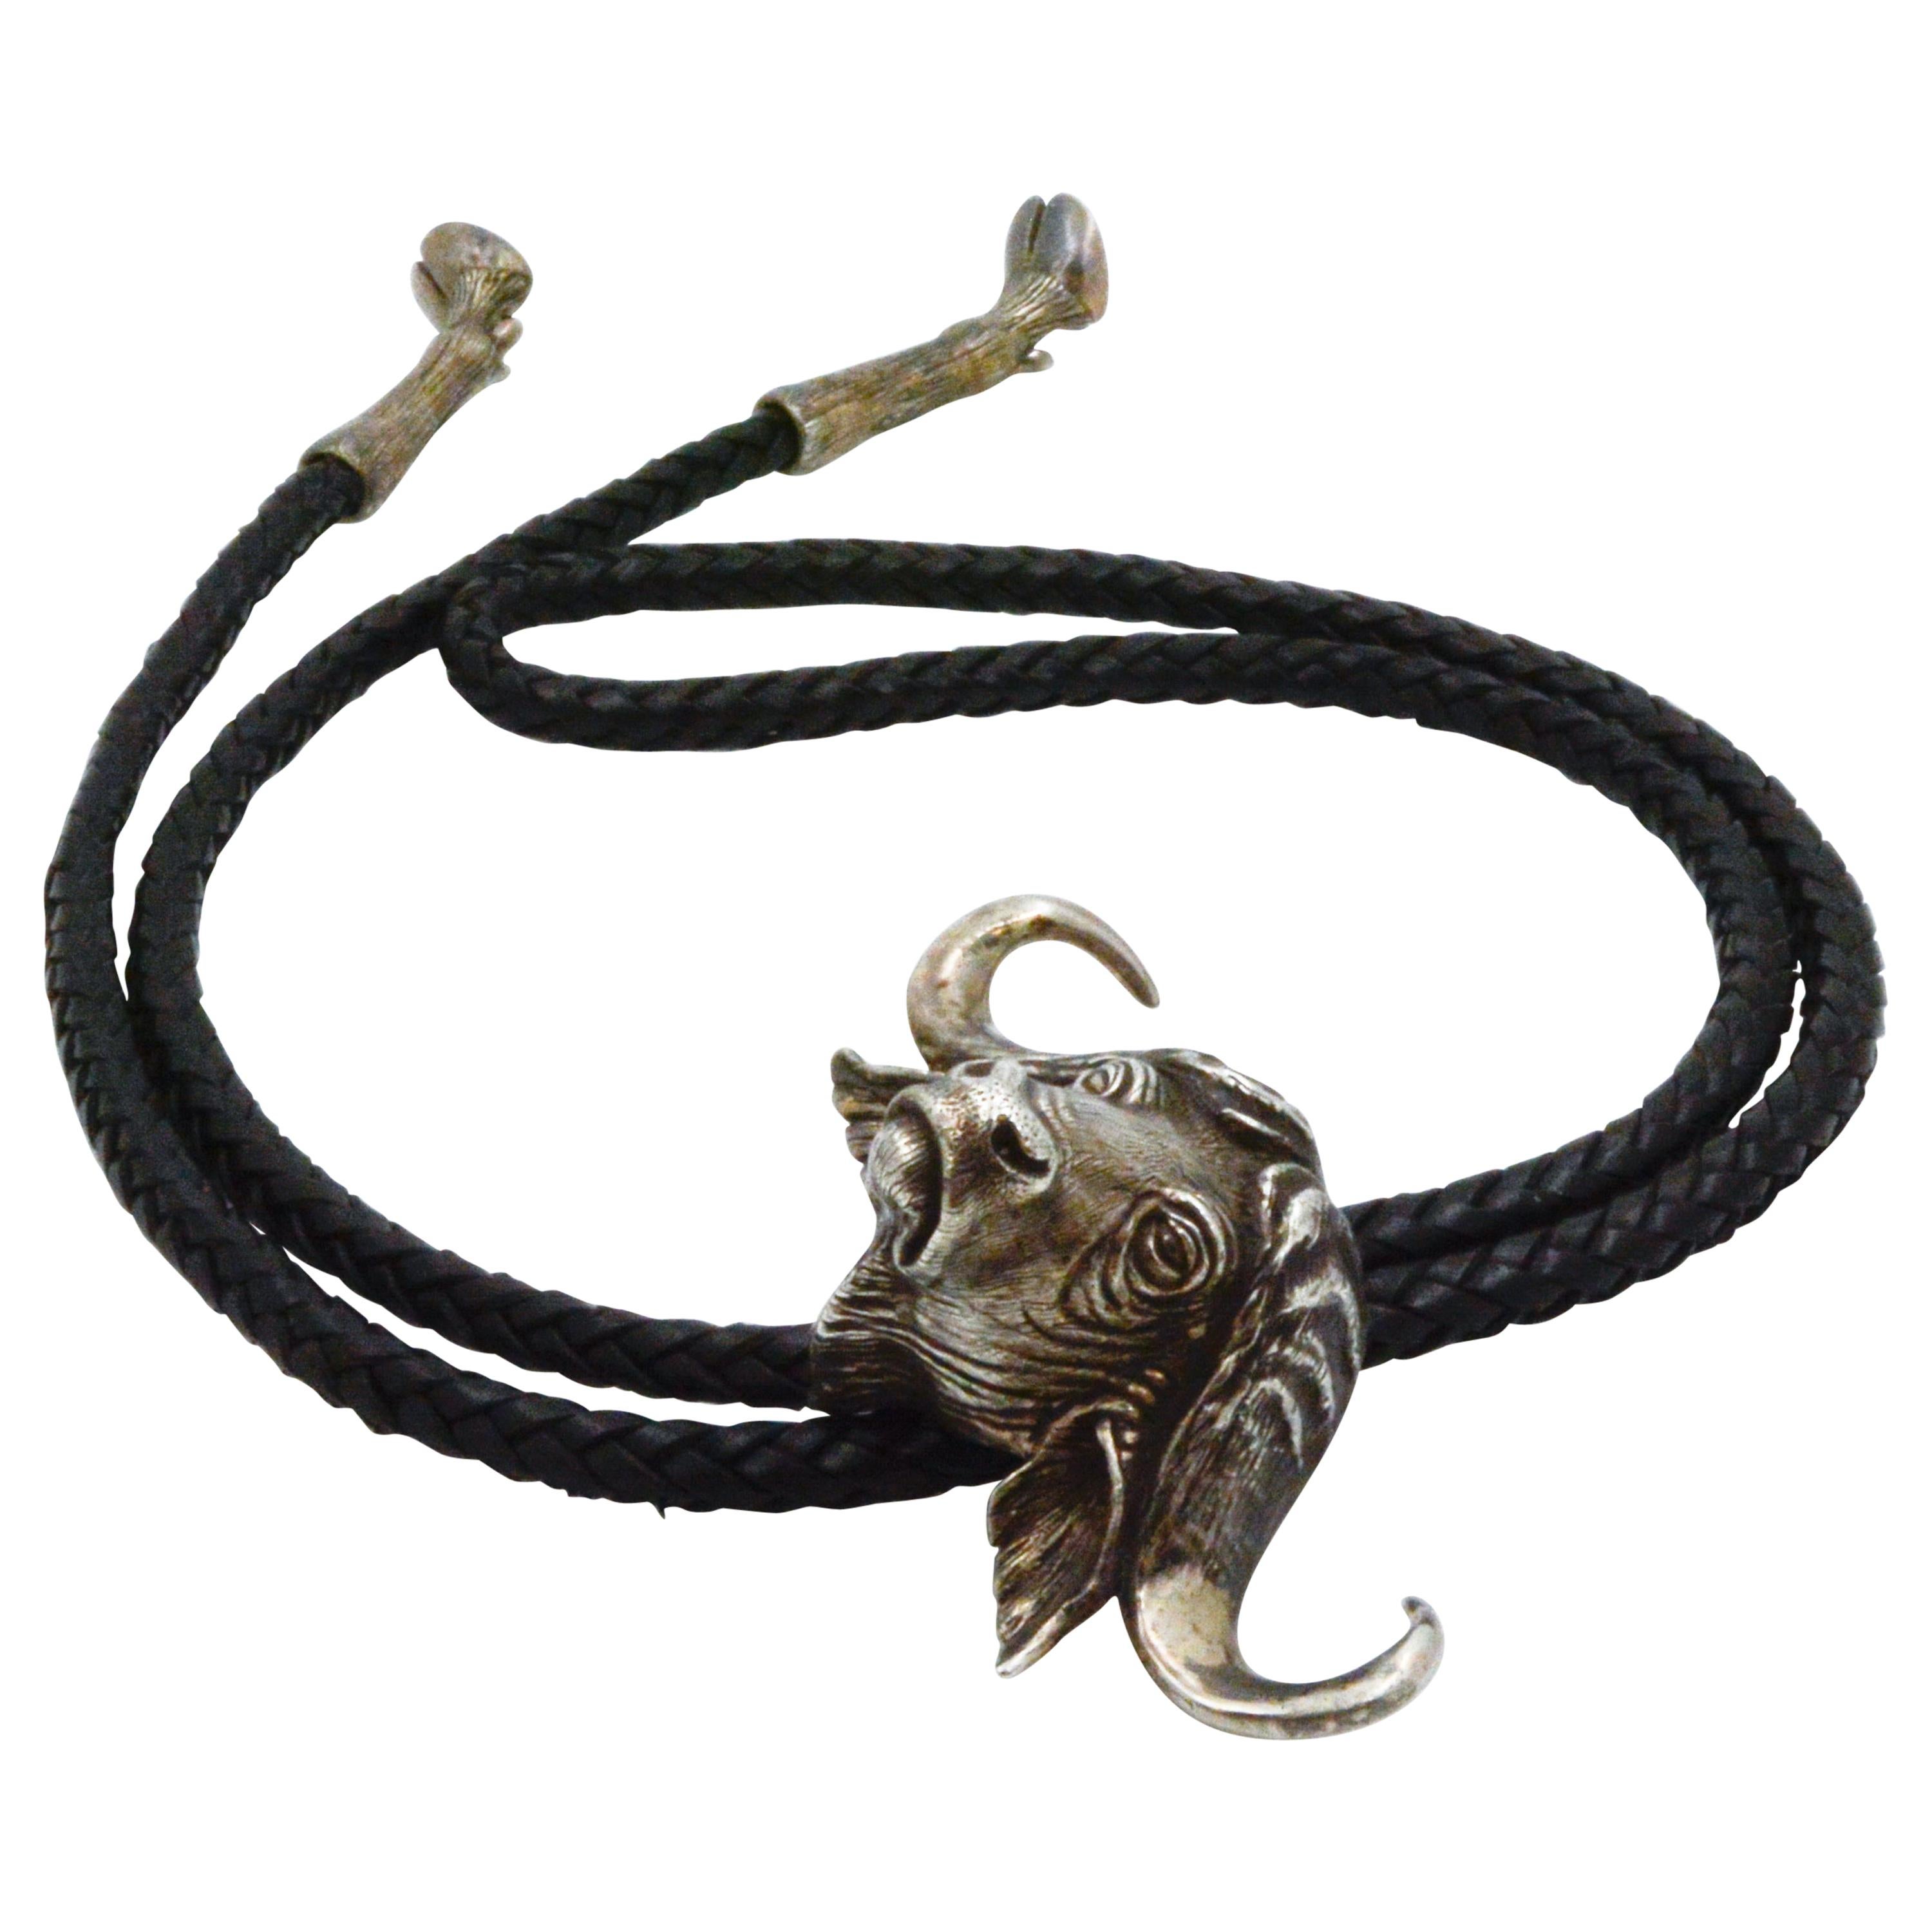 This charming sterling silver Water Buffalo bolo tie is signed by Jug. It is paired with a 40in braided black leather strap. It also has two sterling silver hooves at the tip of the pieces. 